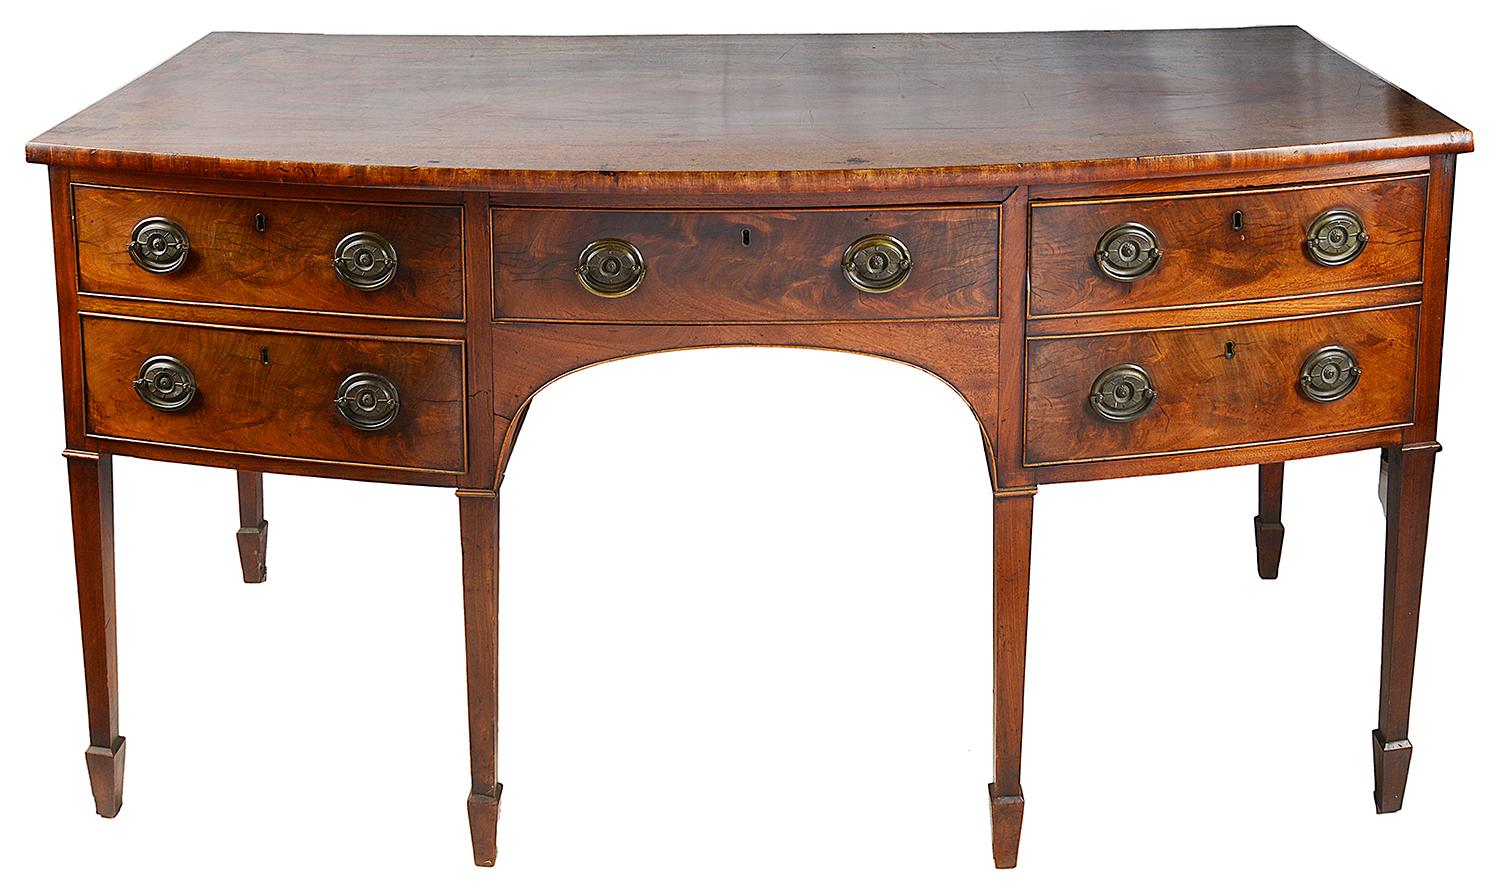 A good quality 19th century Georgian period Mahogany bow fronted sideboard, Having four drawers with brass ring drop handles, one being a double cellaret drawer, raised on square tapering legs, terminating in spade feet.